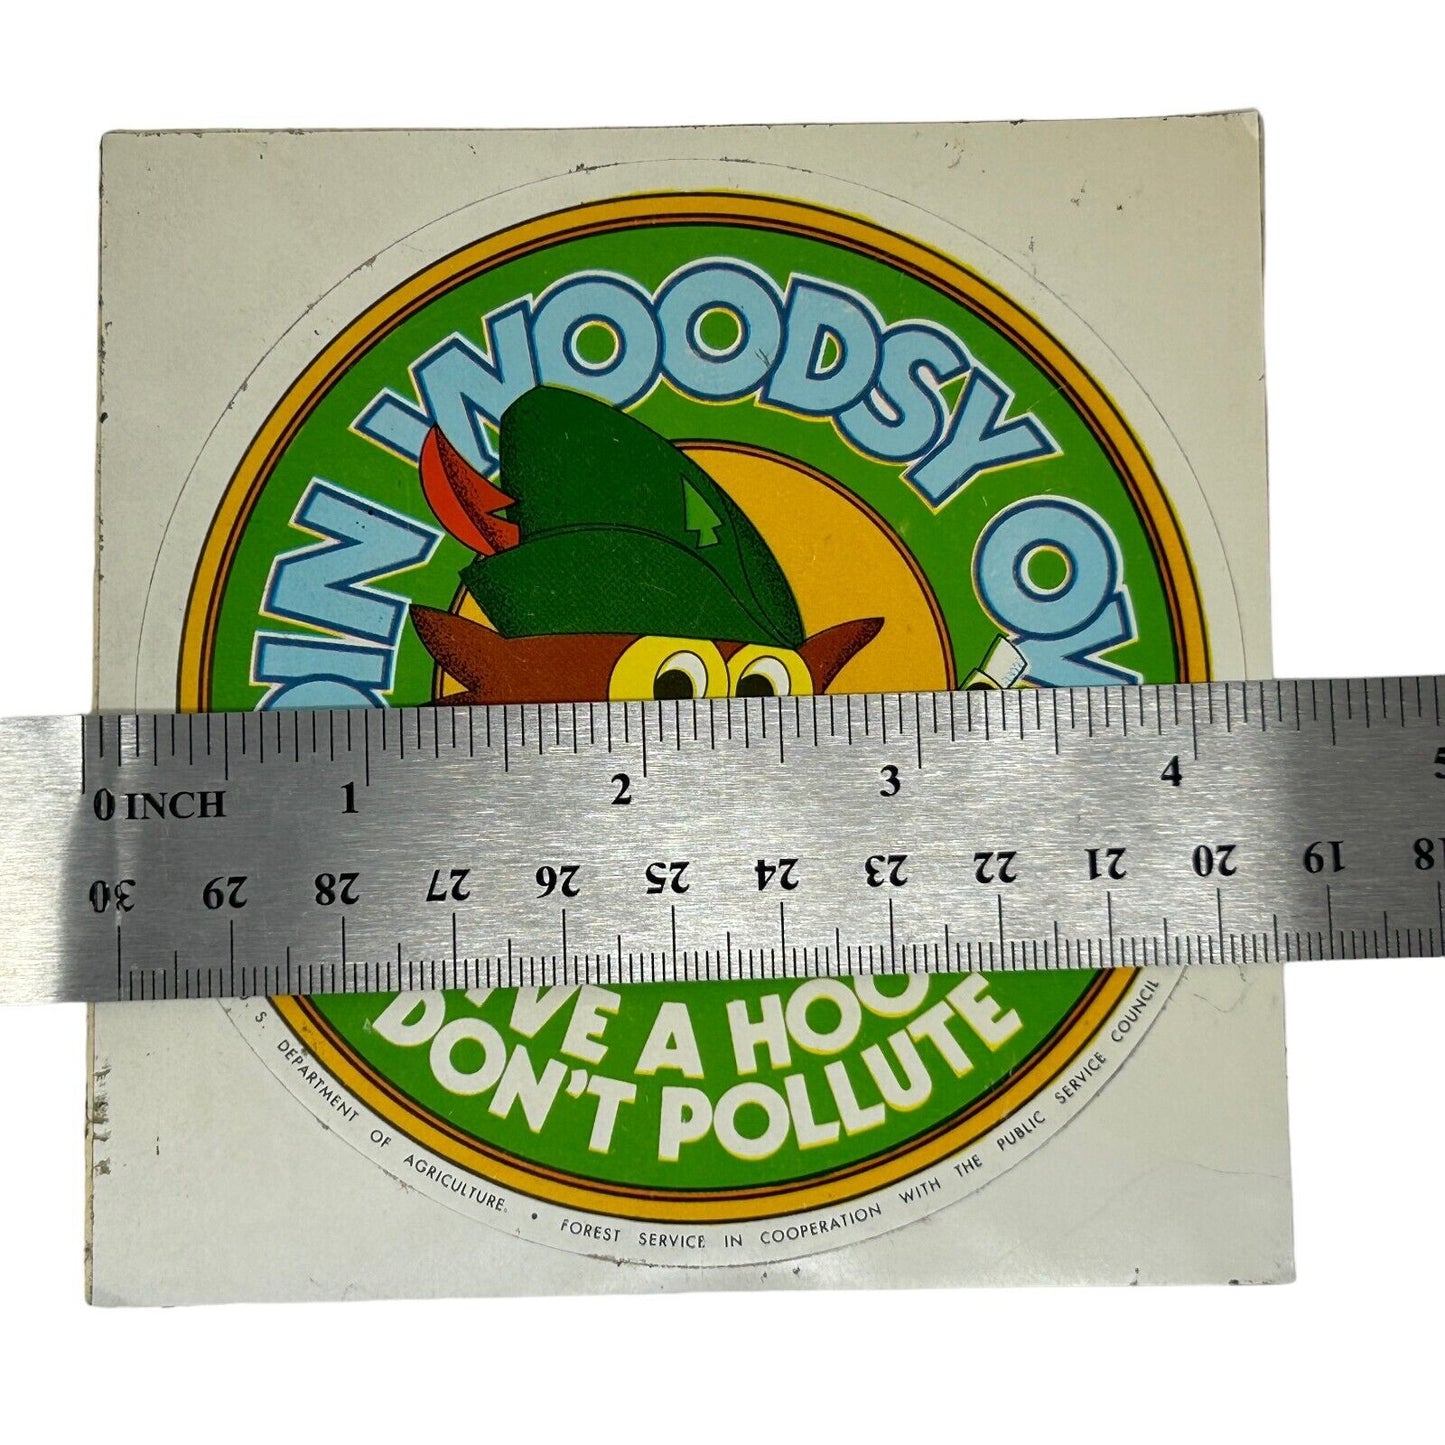 Join Woodsy Owl Vintage 80s Sticker Give a Hoot Don't Pollute Forest Service 4"